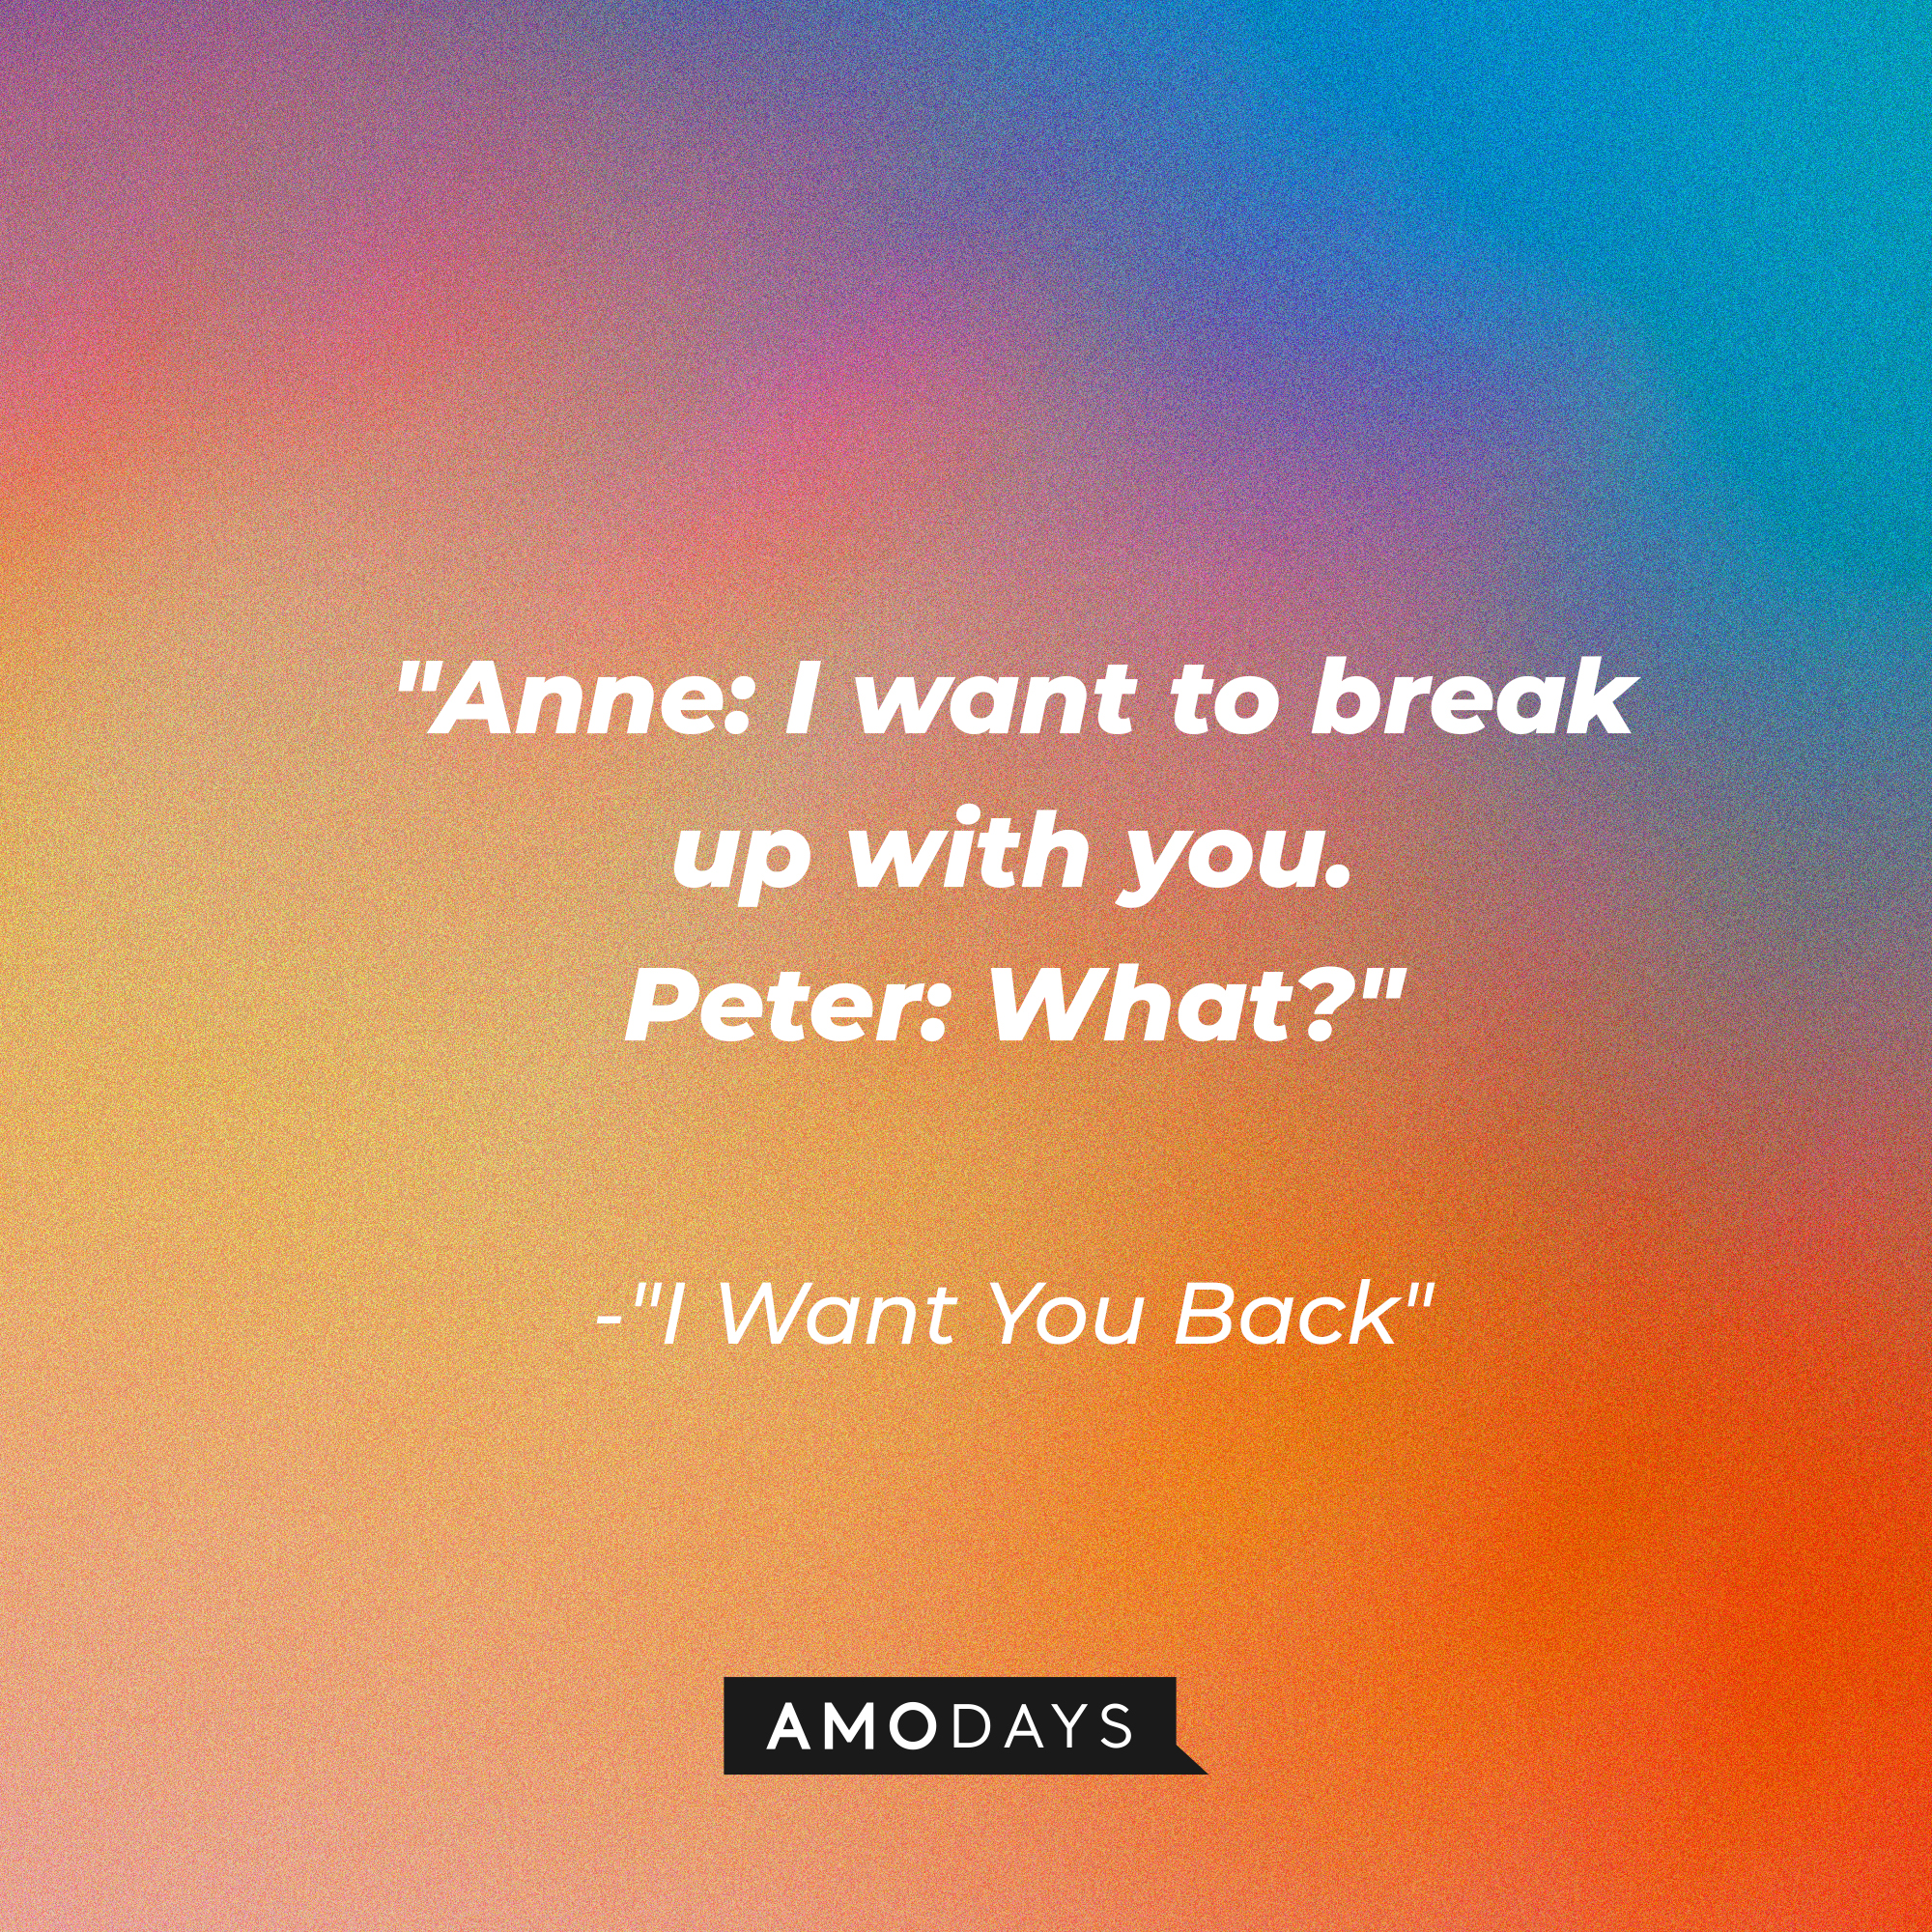 Anne and Peter's dialogue in "I Want You Back:" "Anne: I want to break up with you. Peter: What?" | Source: AmoDays